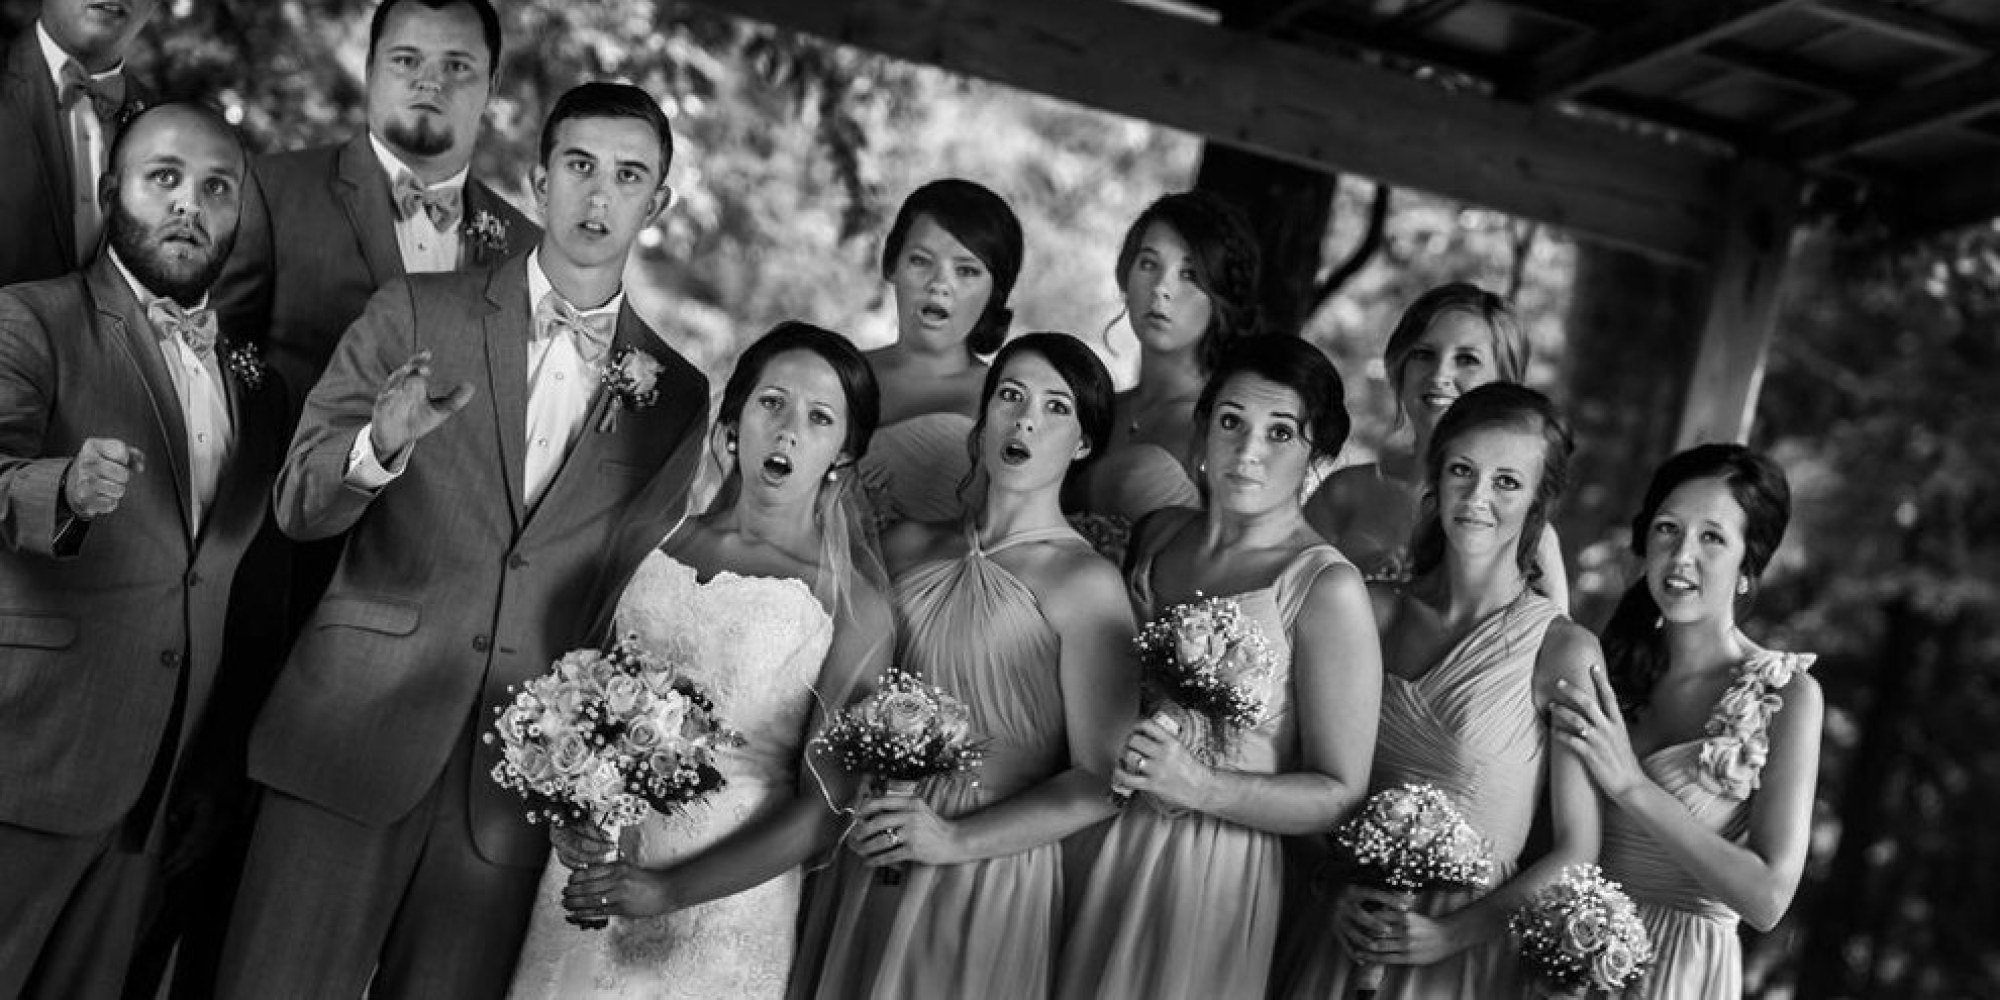 A Wedding Photog Slipped While Taking A Picture And The Result Is